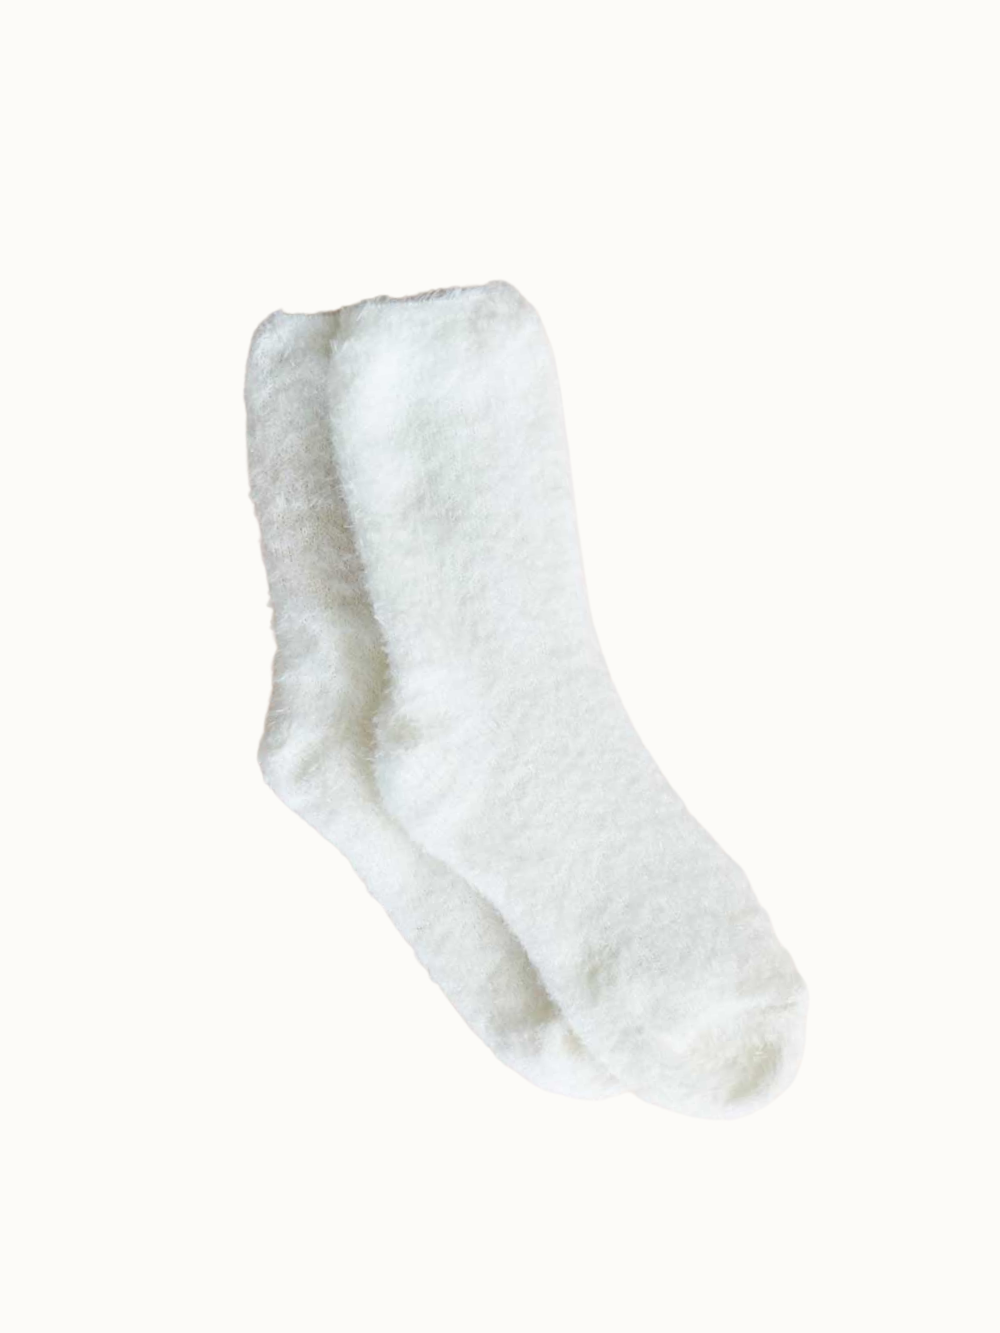 Plush fuzzy socks in ivory are a cozy gift for her, wellness gift, get well soon gift, 